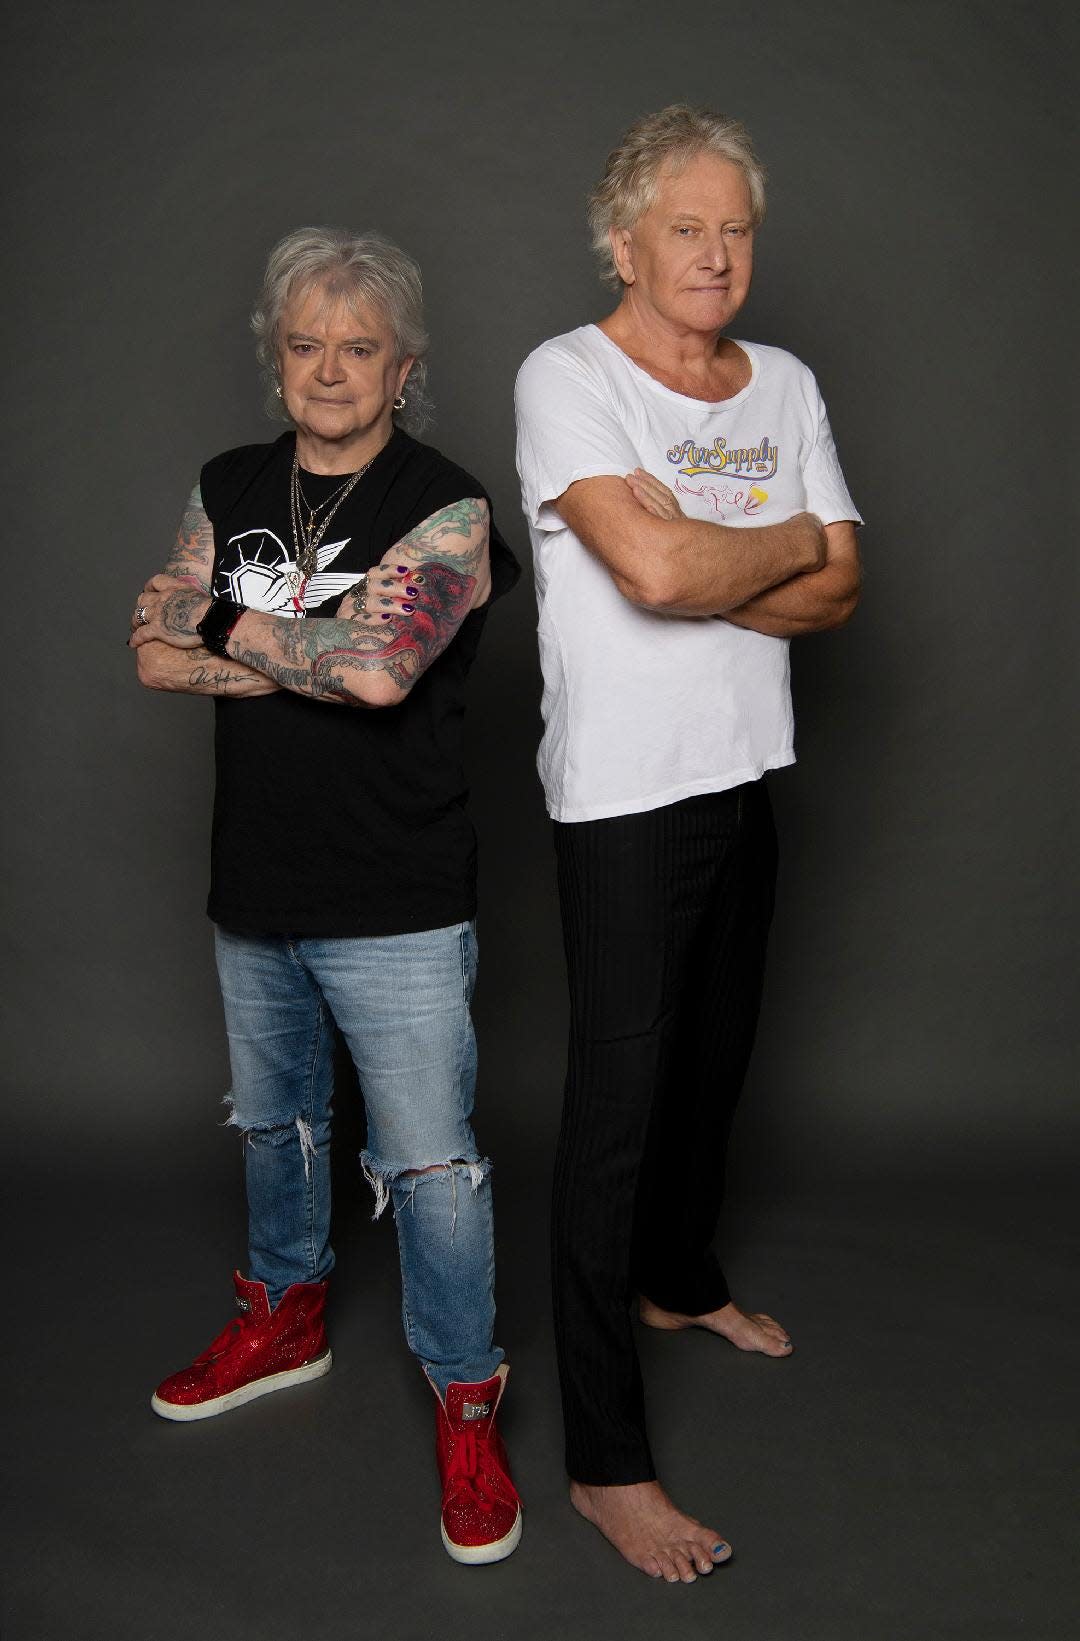 Air Supply is at The Lowell Auditorium on May 10.